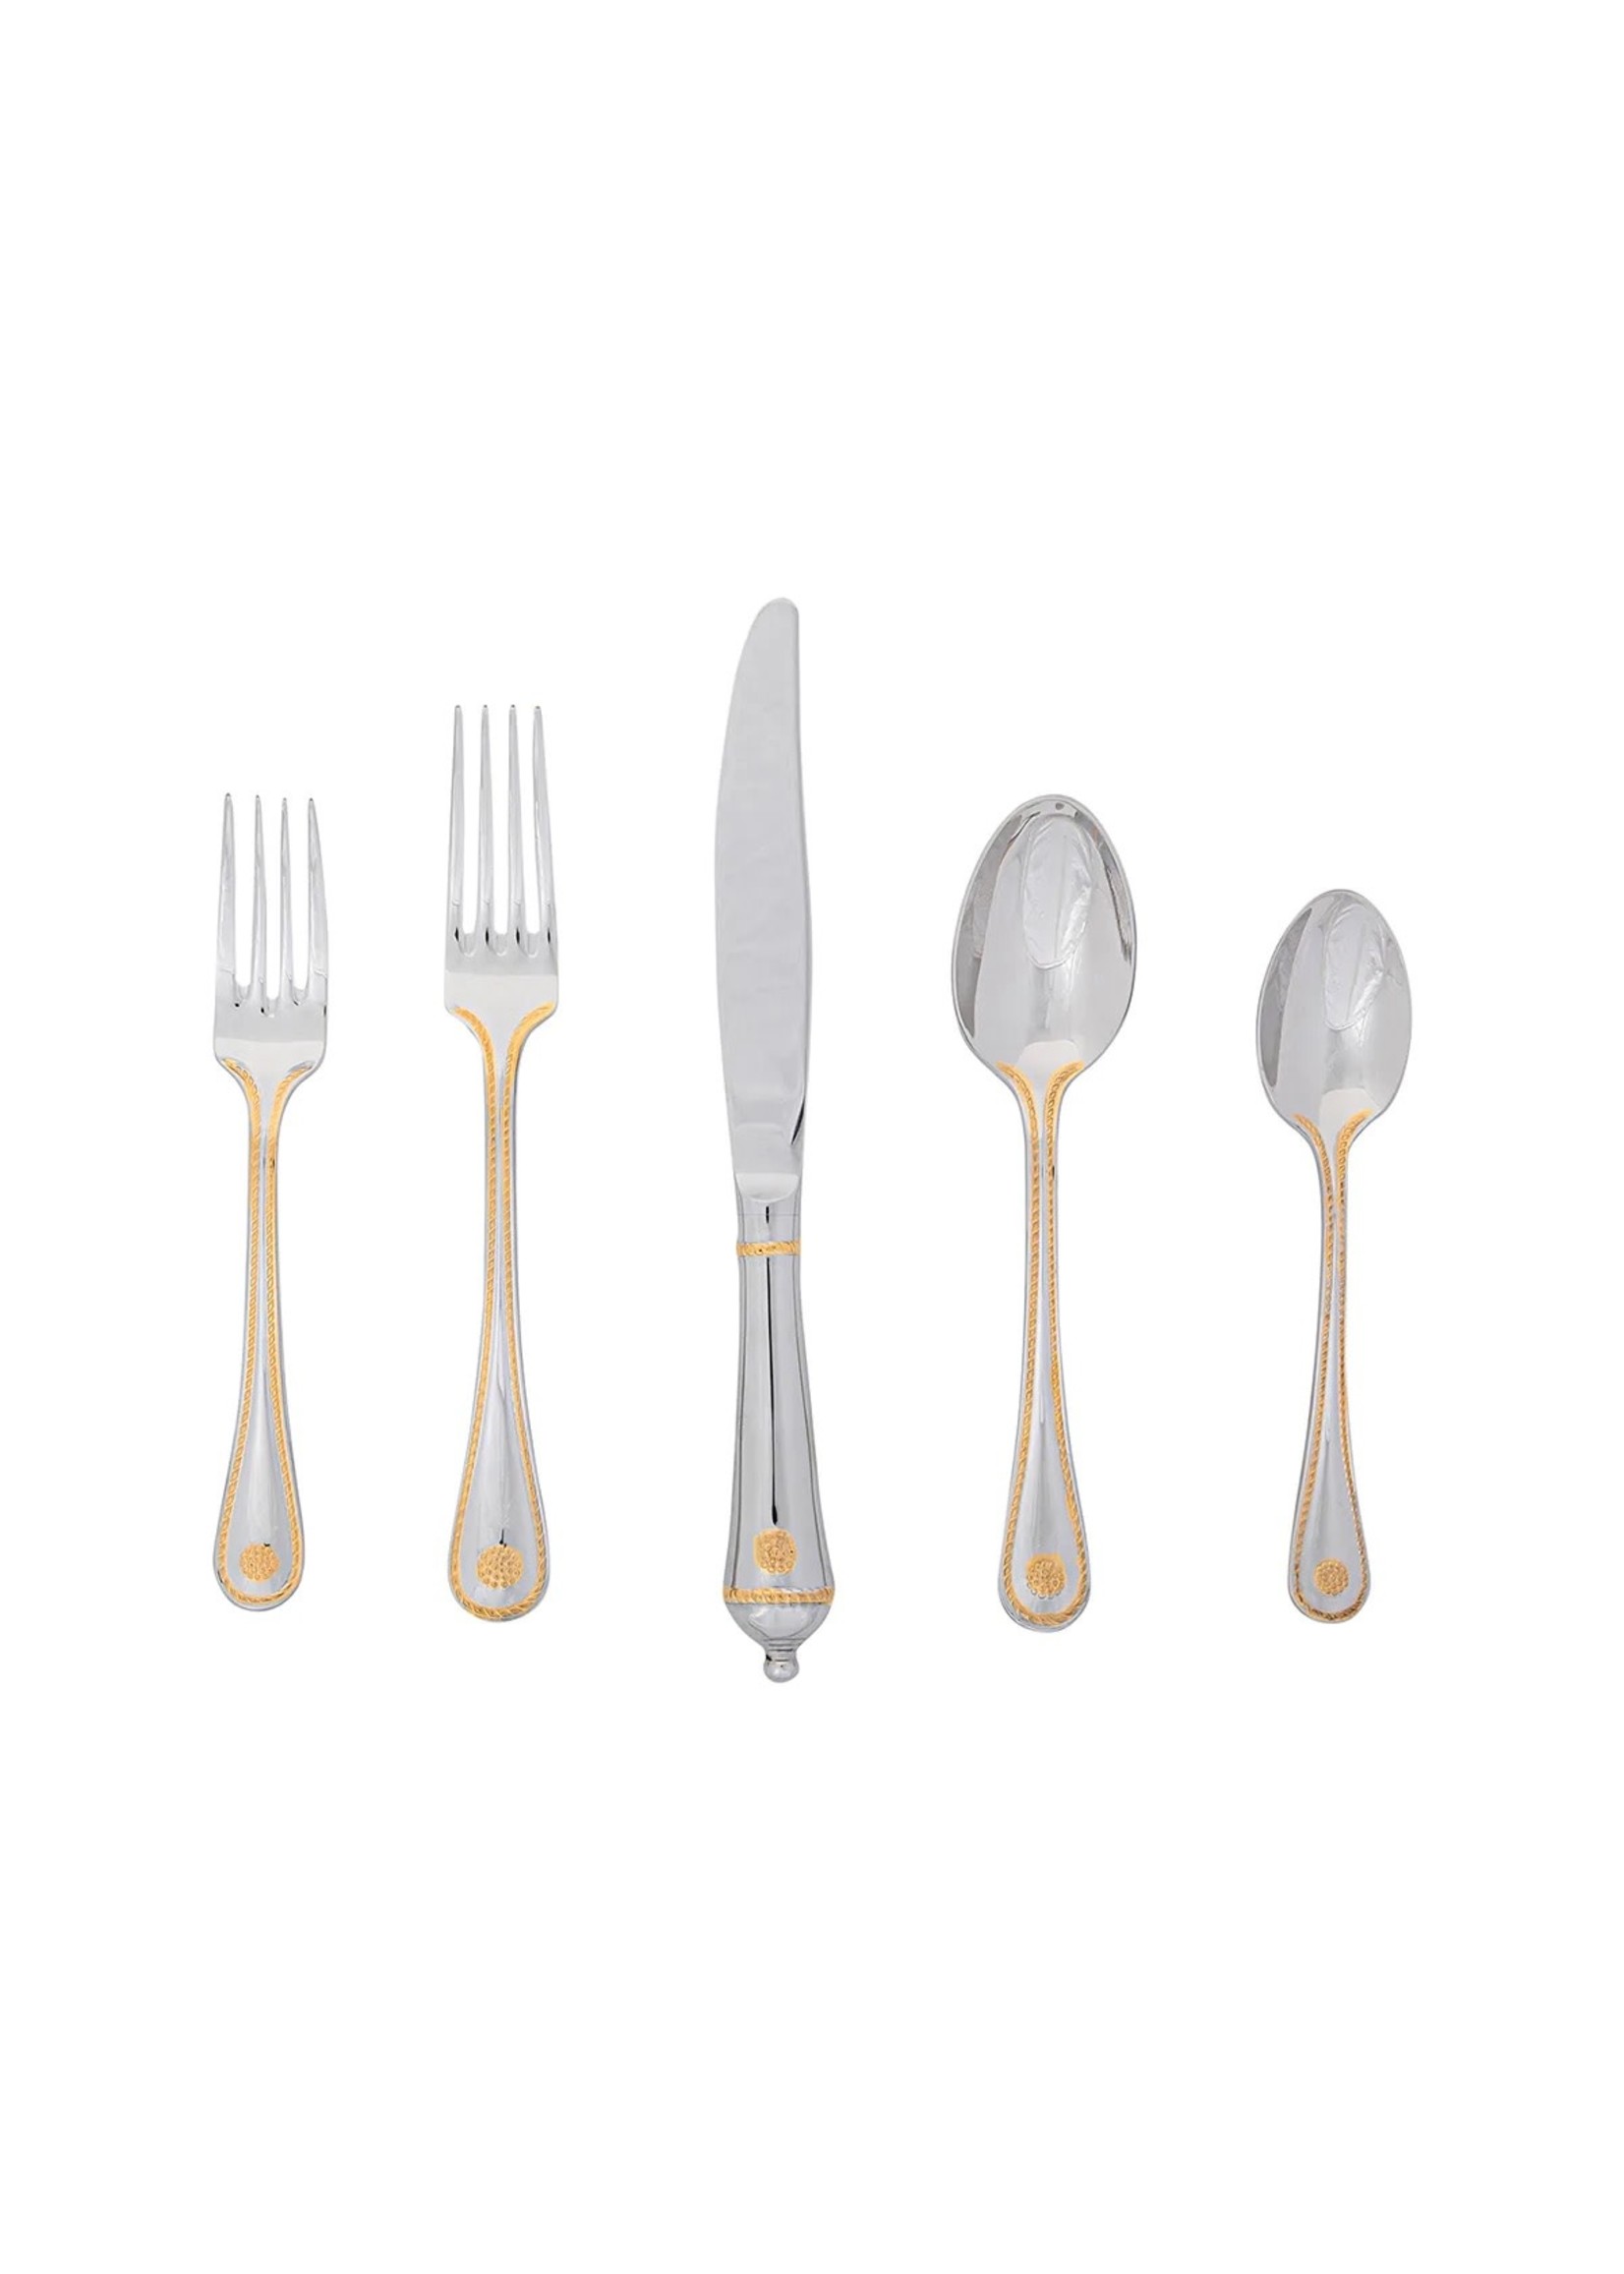 Juliska Berry & Thread Flatware Polished with Gold Accents Flatware 5pc Setting